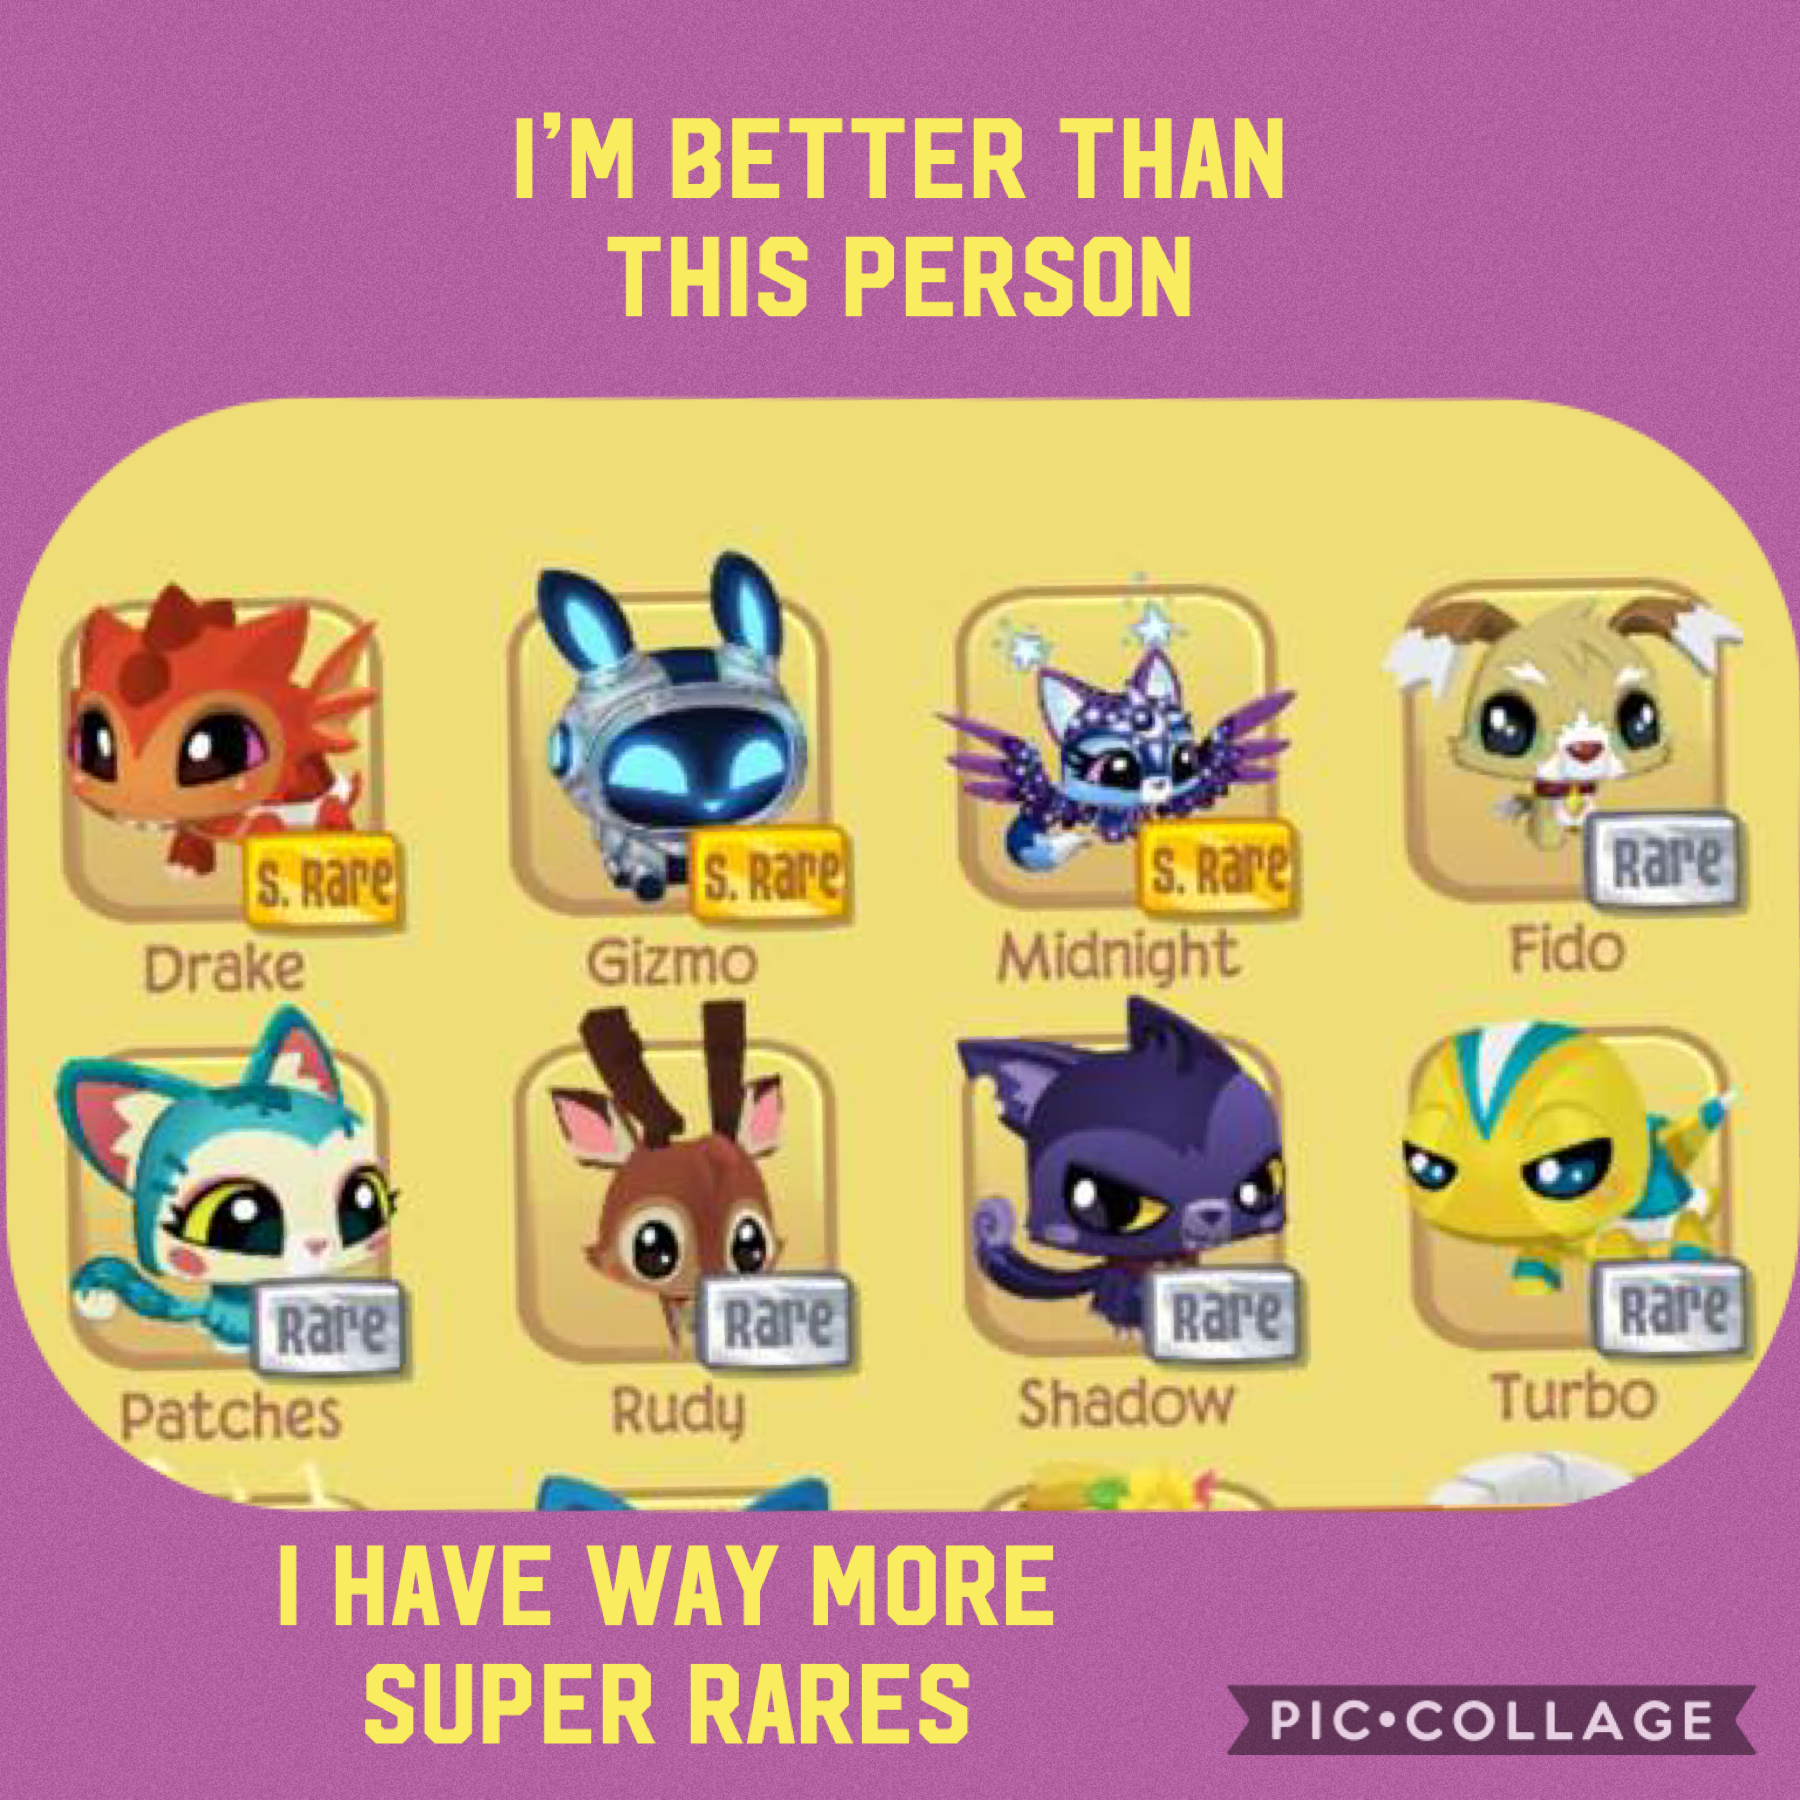 ⭐️tap⭐️
Sorry, sometimes I like to compare myself to others